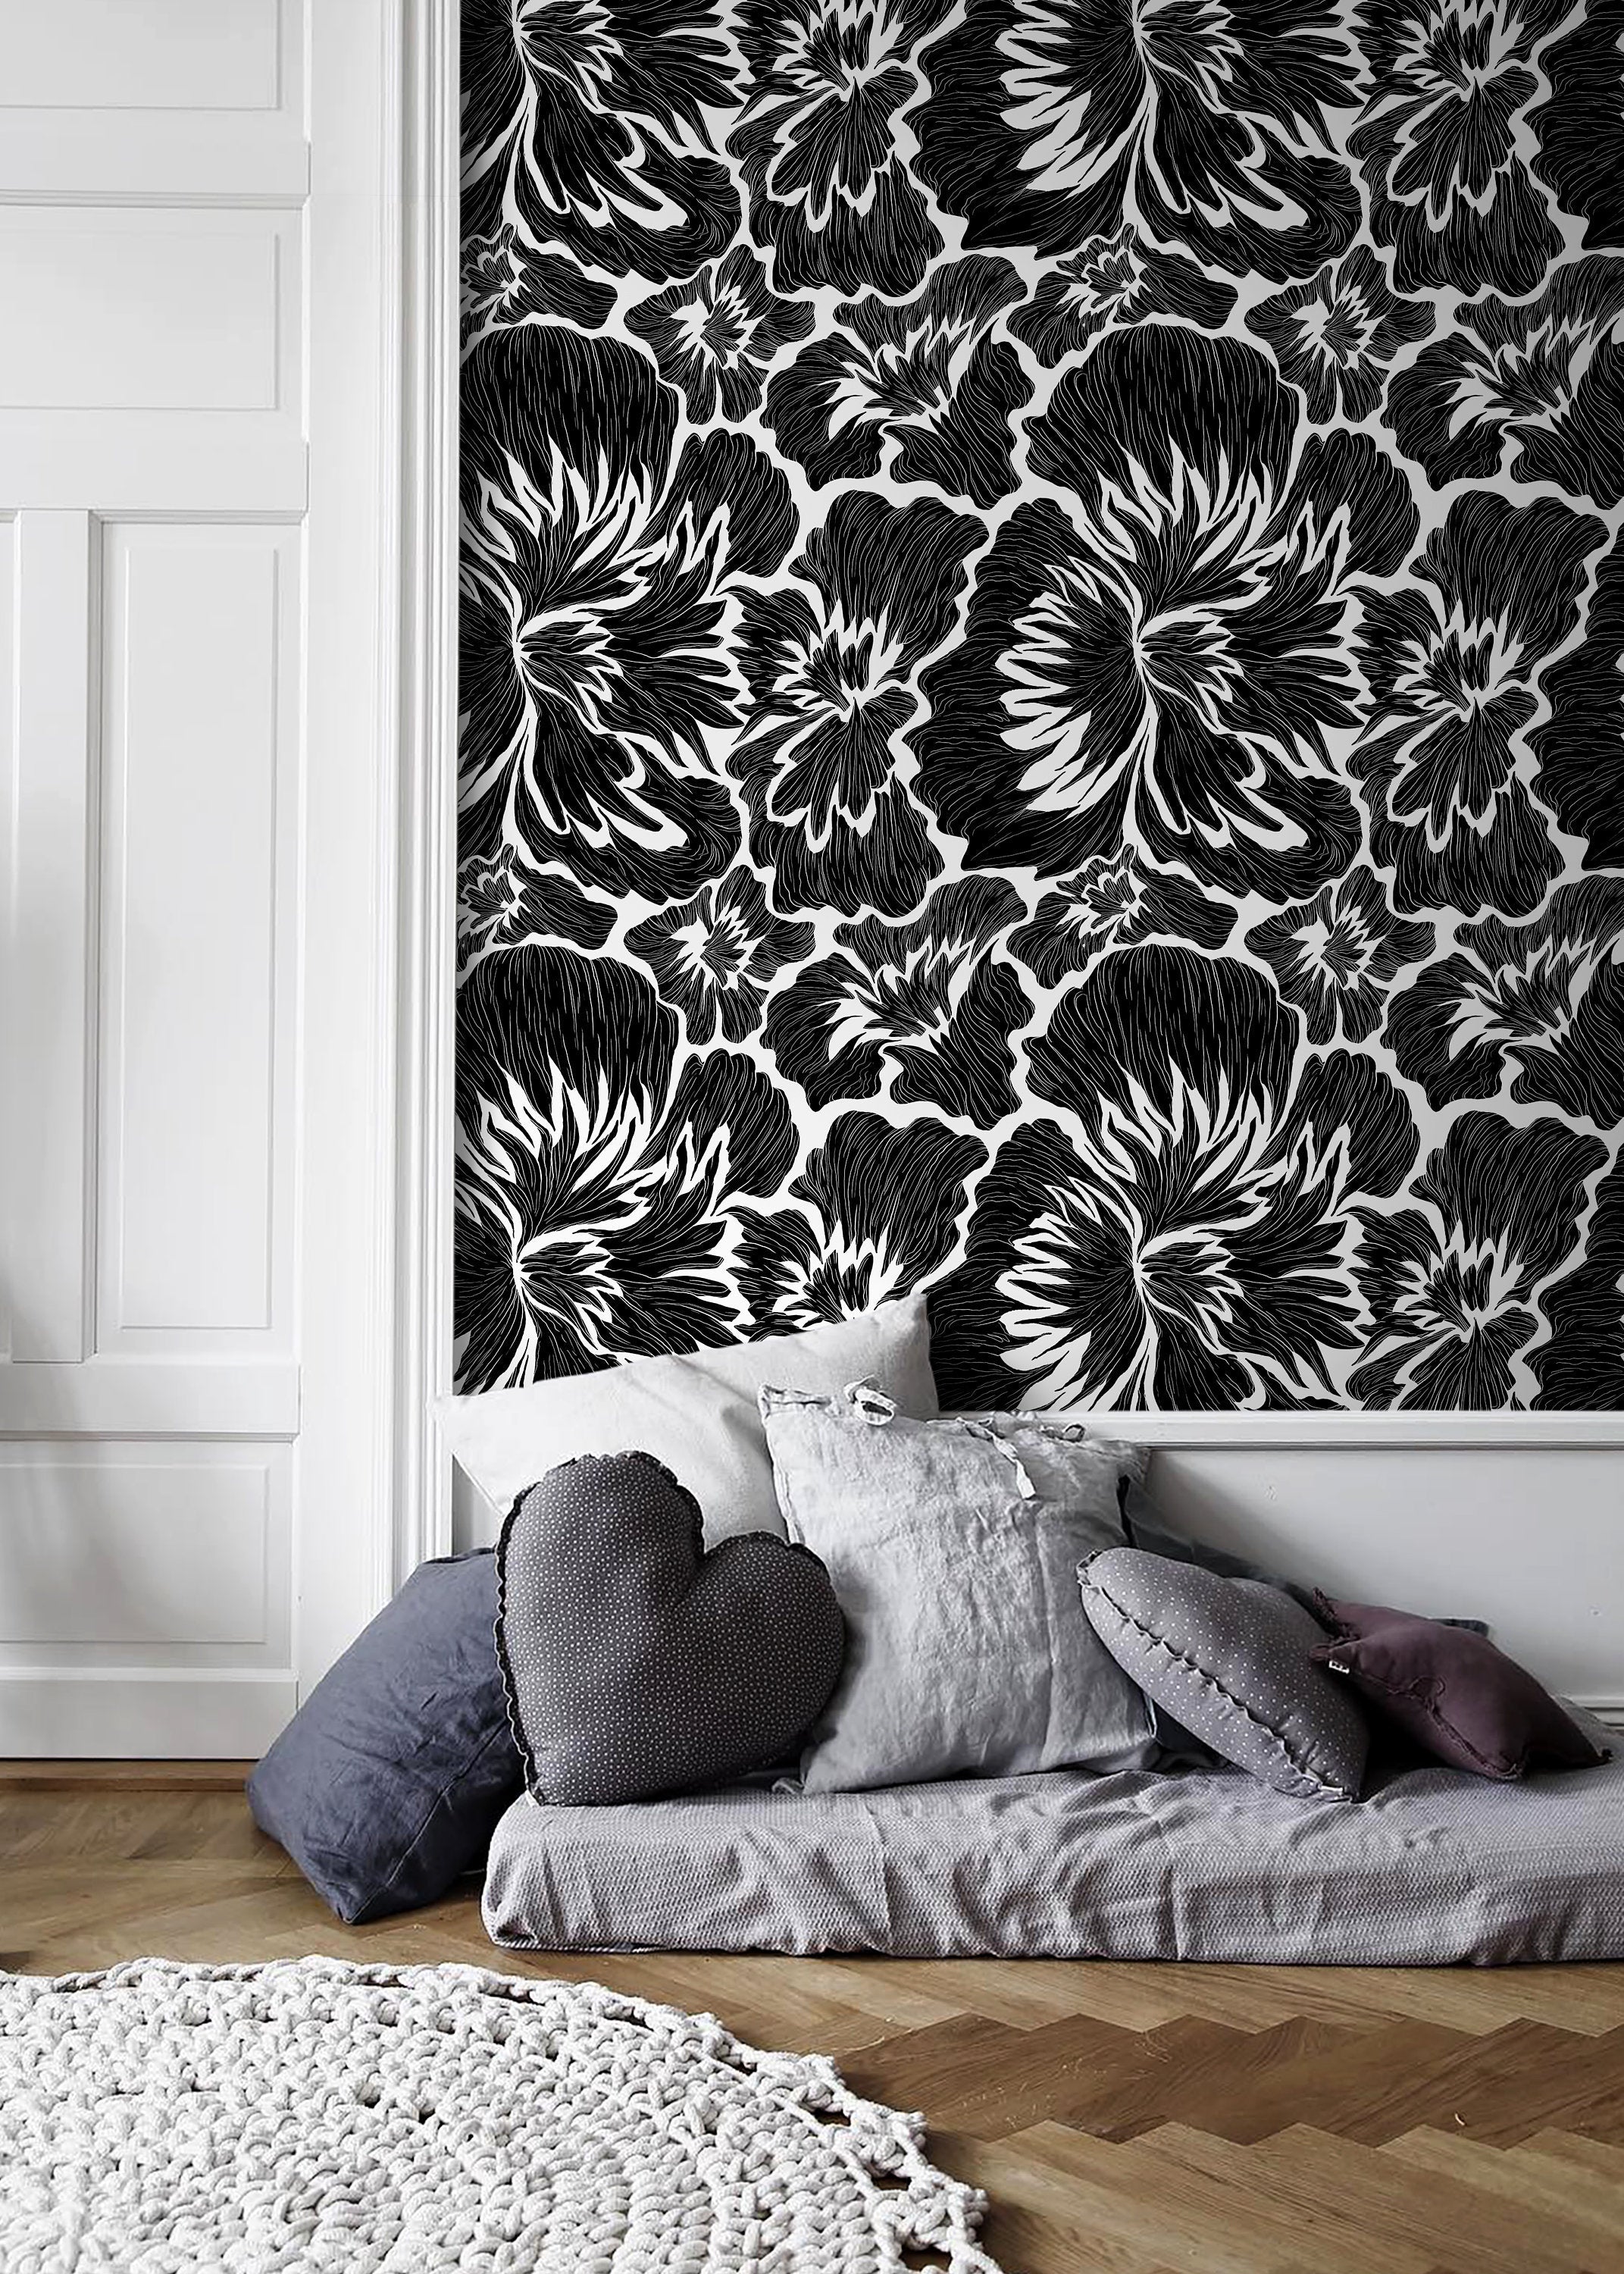 Rich dark and oversized Yes bold floral wallpaper is trending   MyFixitUpLife